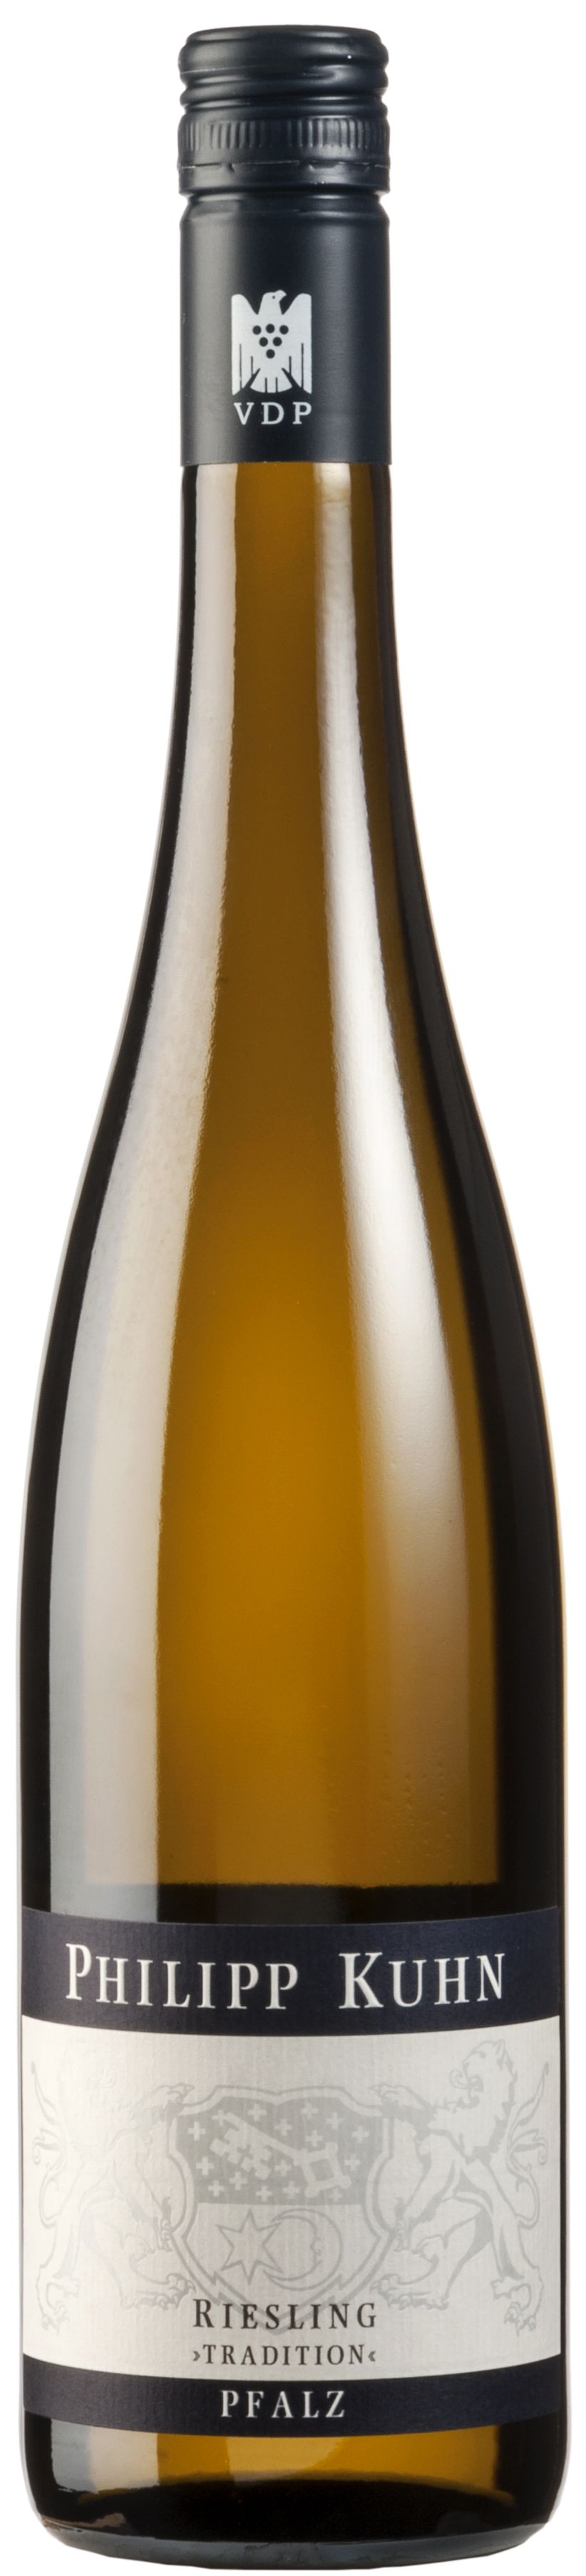 Philipp Kuhn, Riesling Tradition, 2016